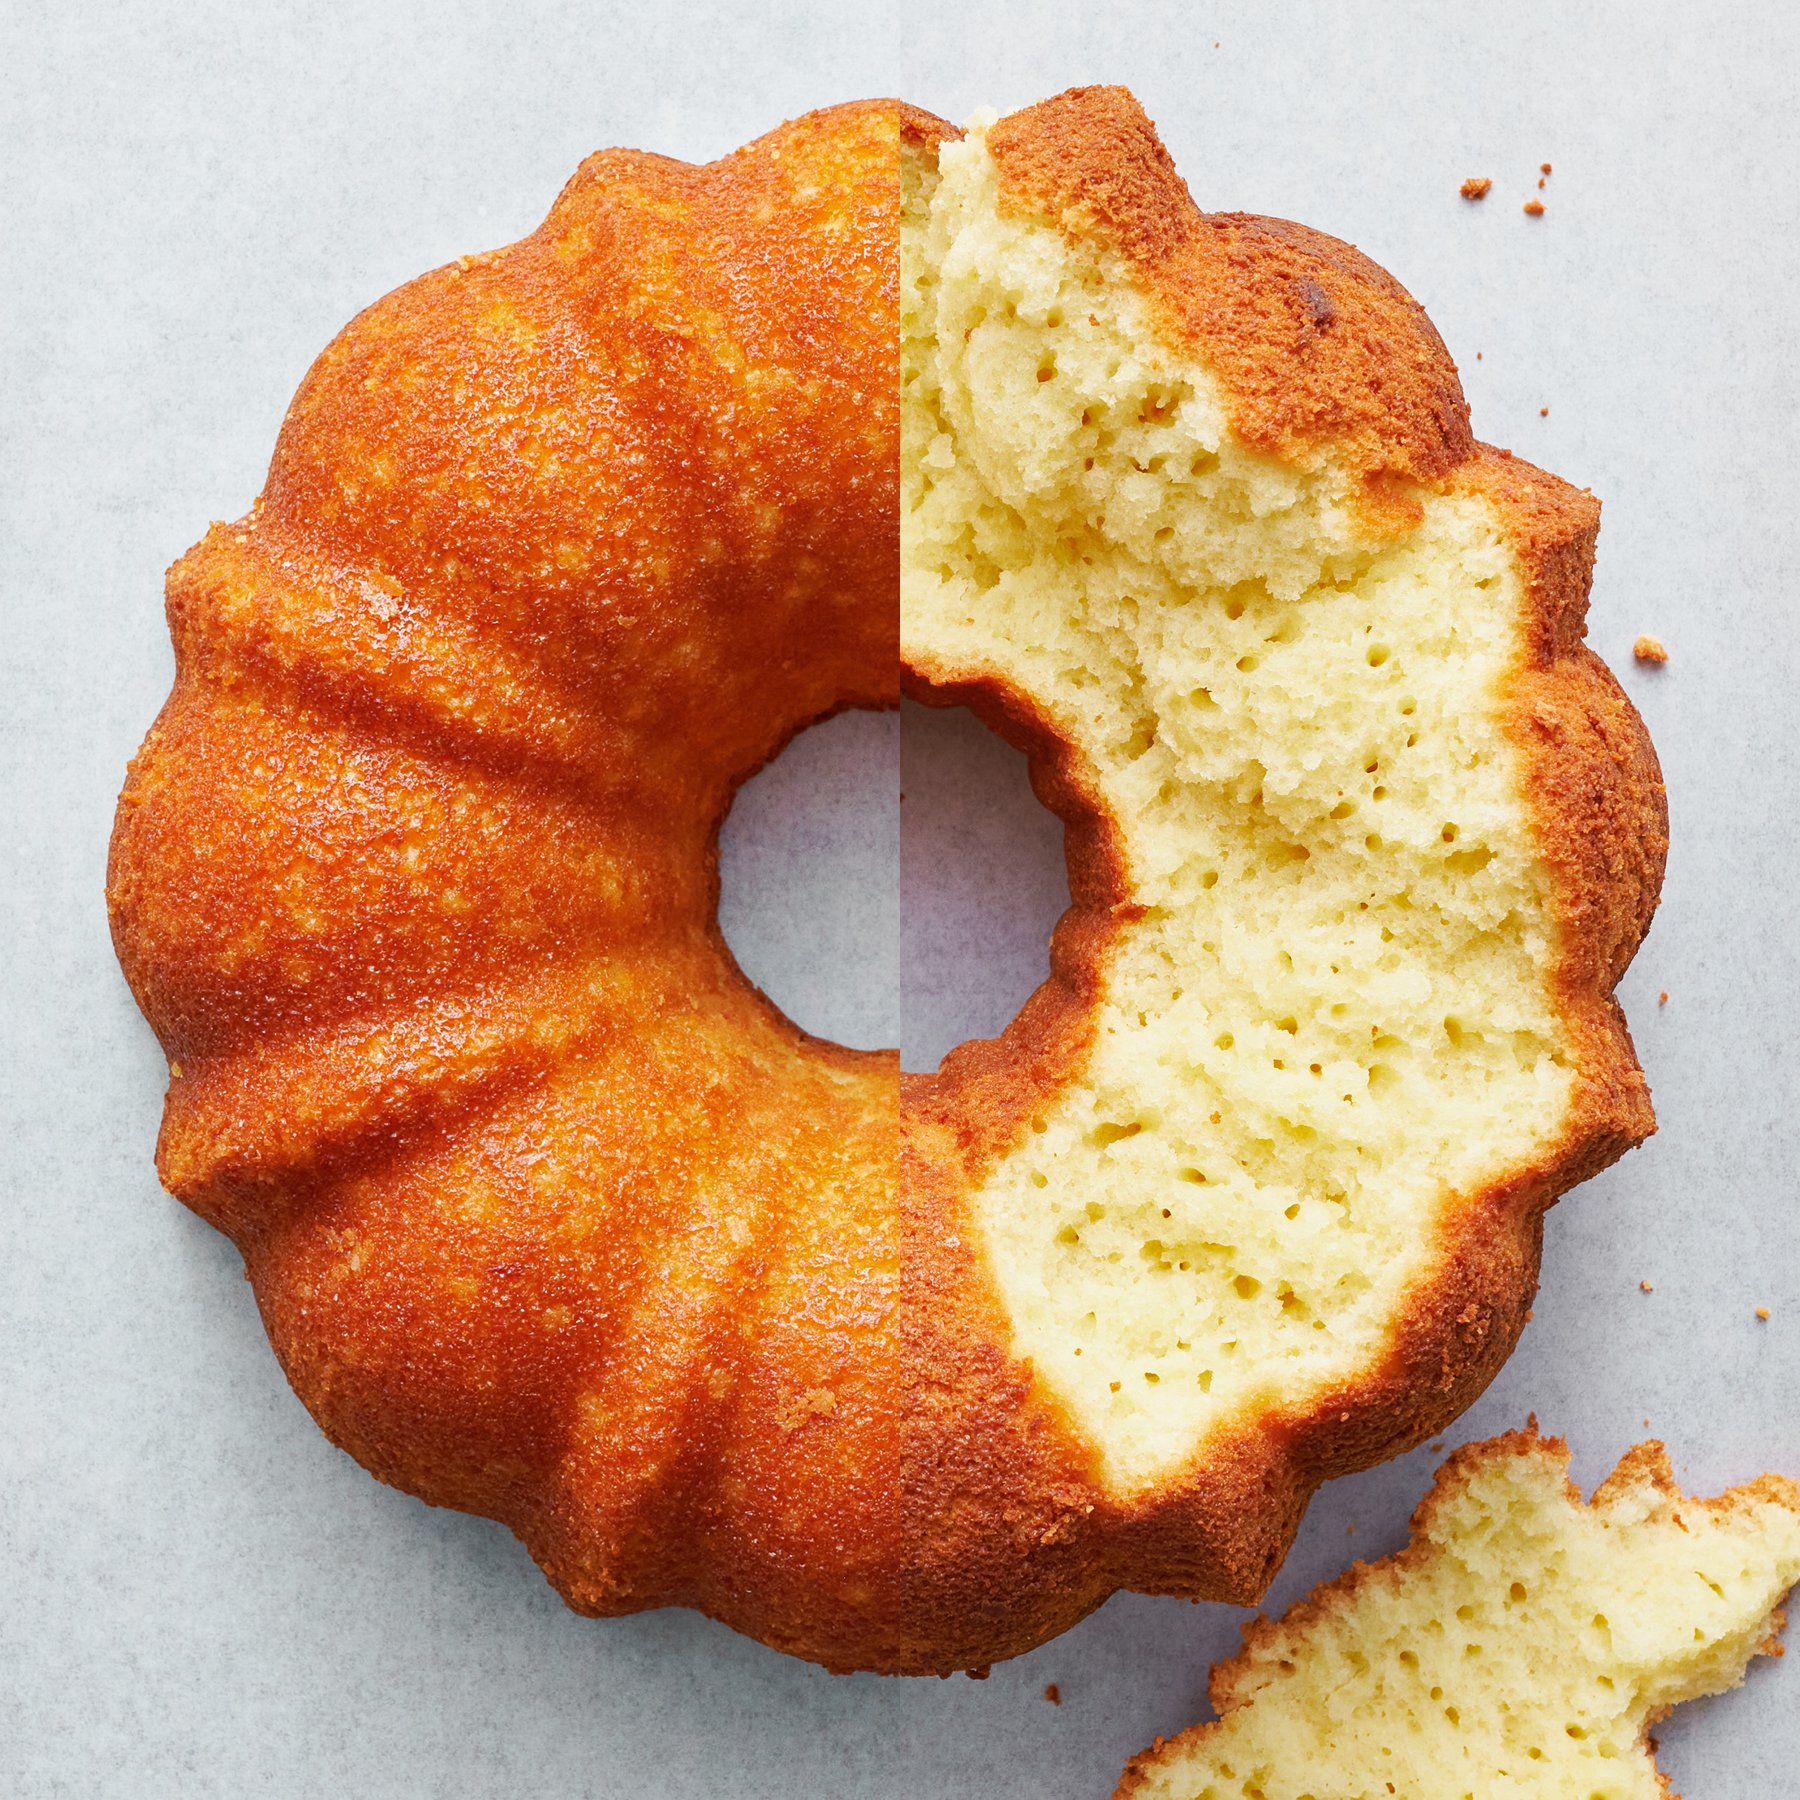 https://handletheheat.com/wp-content/uploads/2018/01/how-to-prevent-bundt-cake-from-sticking-SQUARE-2.jpg